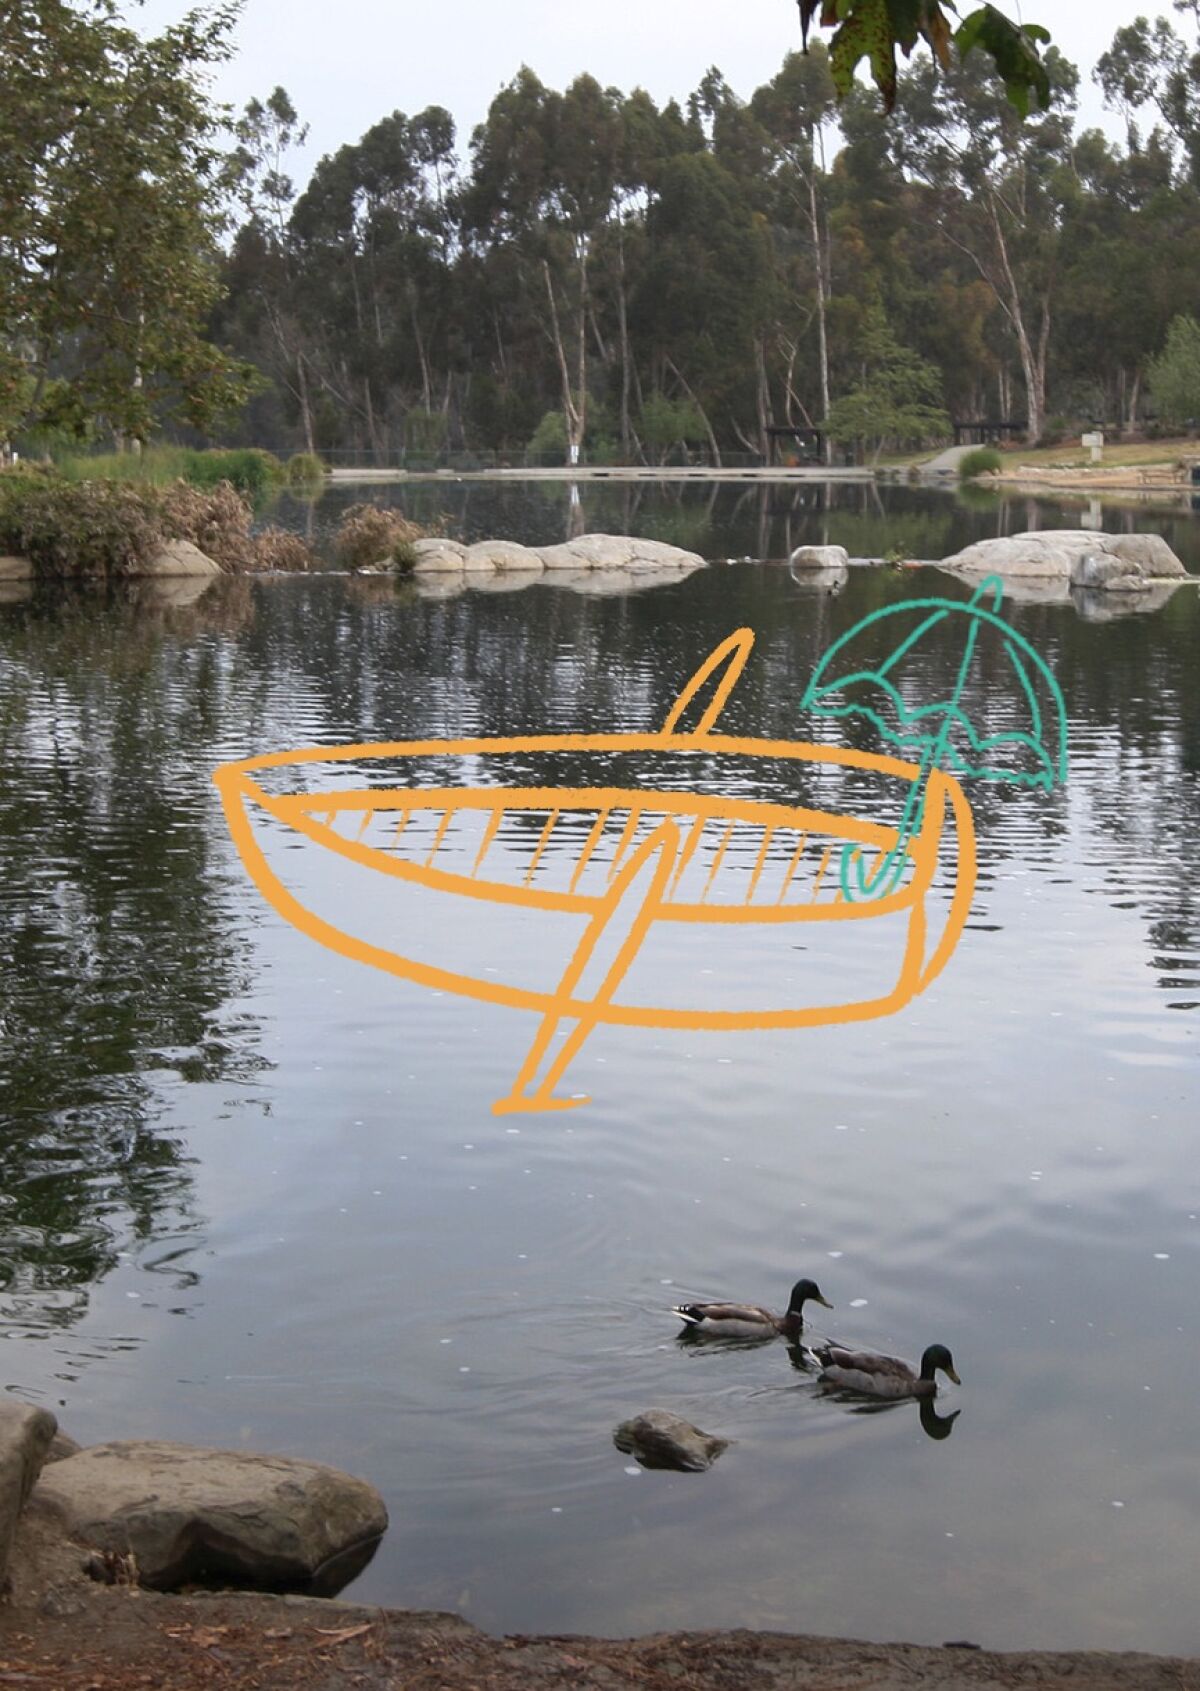 Ducks swim in a lake at Kenneth Hahn State Recreation Area in Los Angeles.